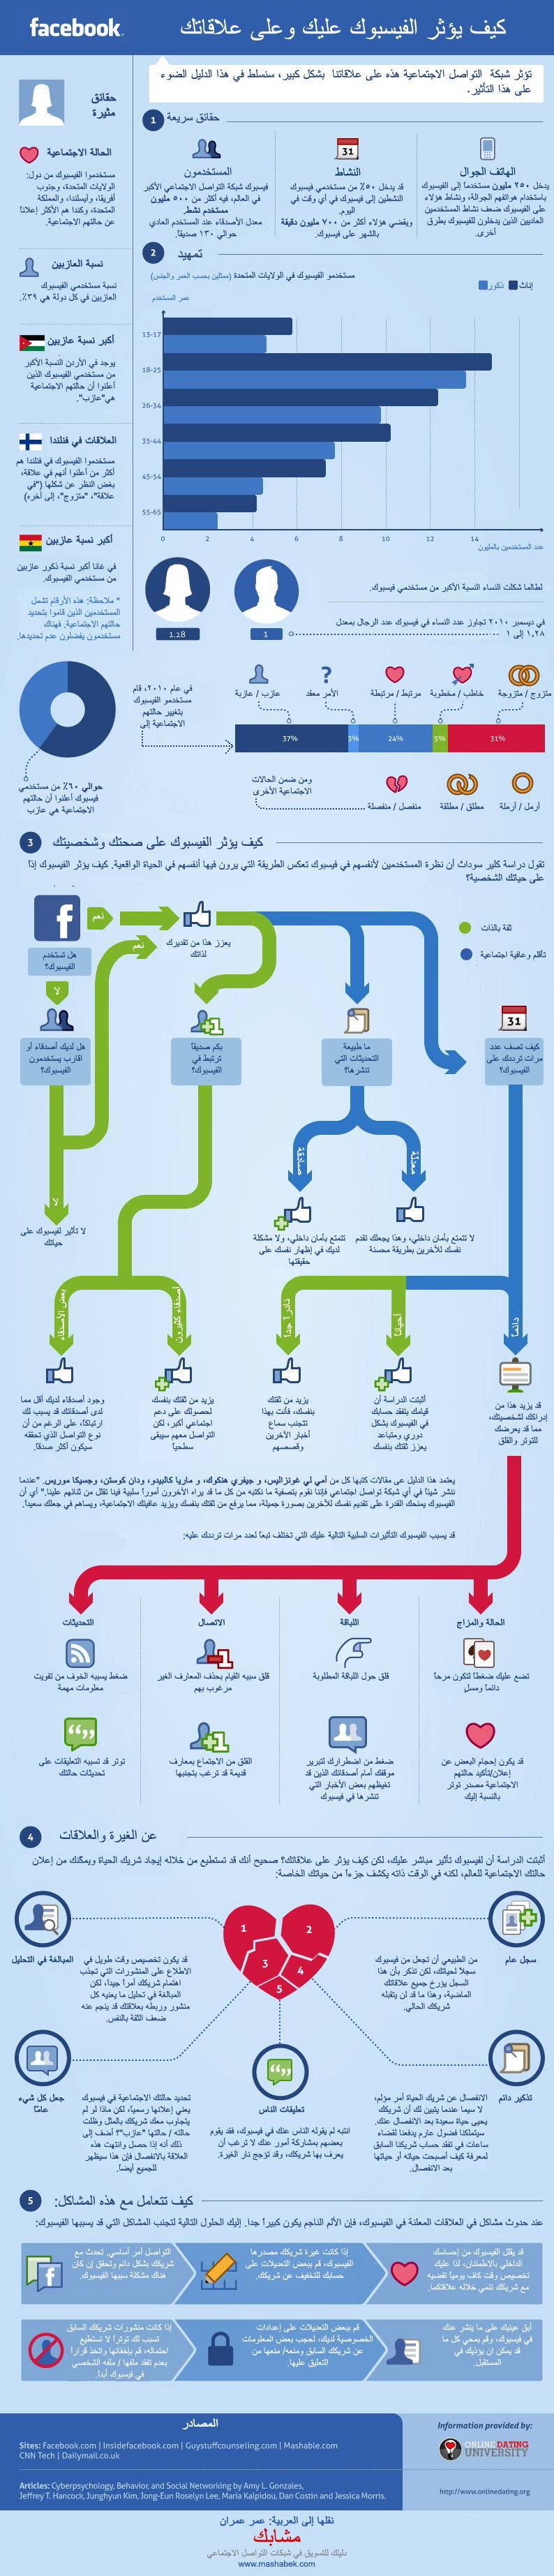 facebook relationships infographic arabic1